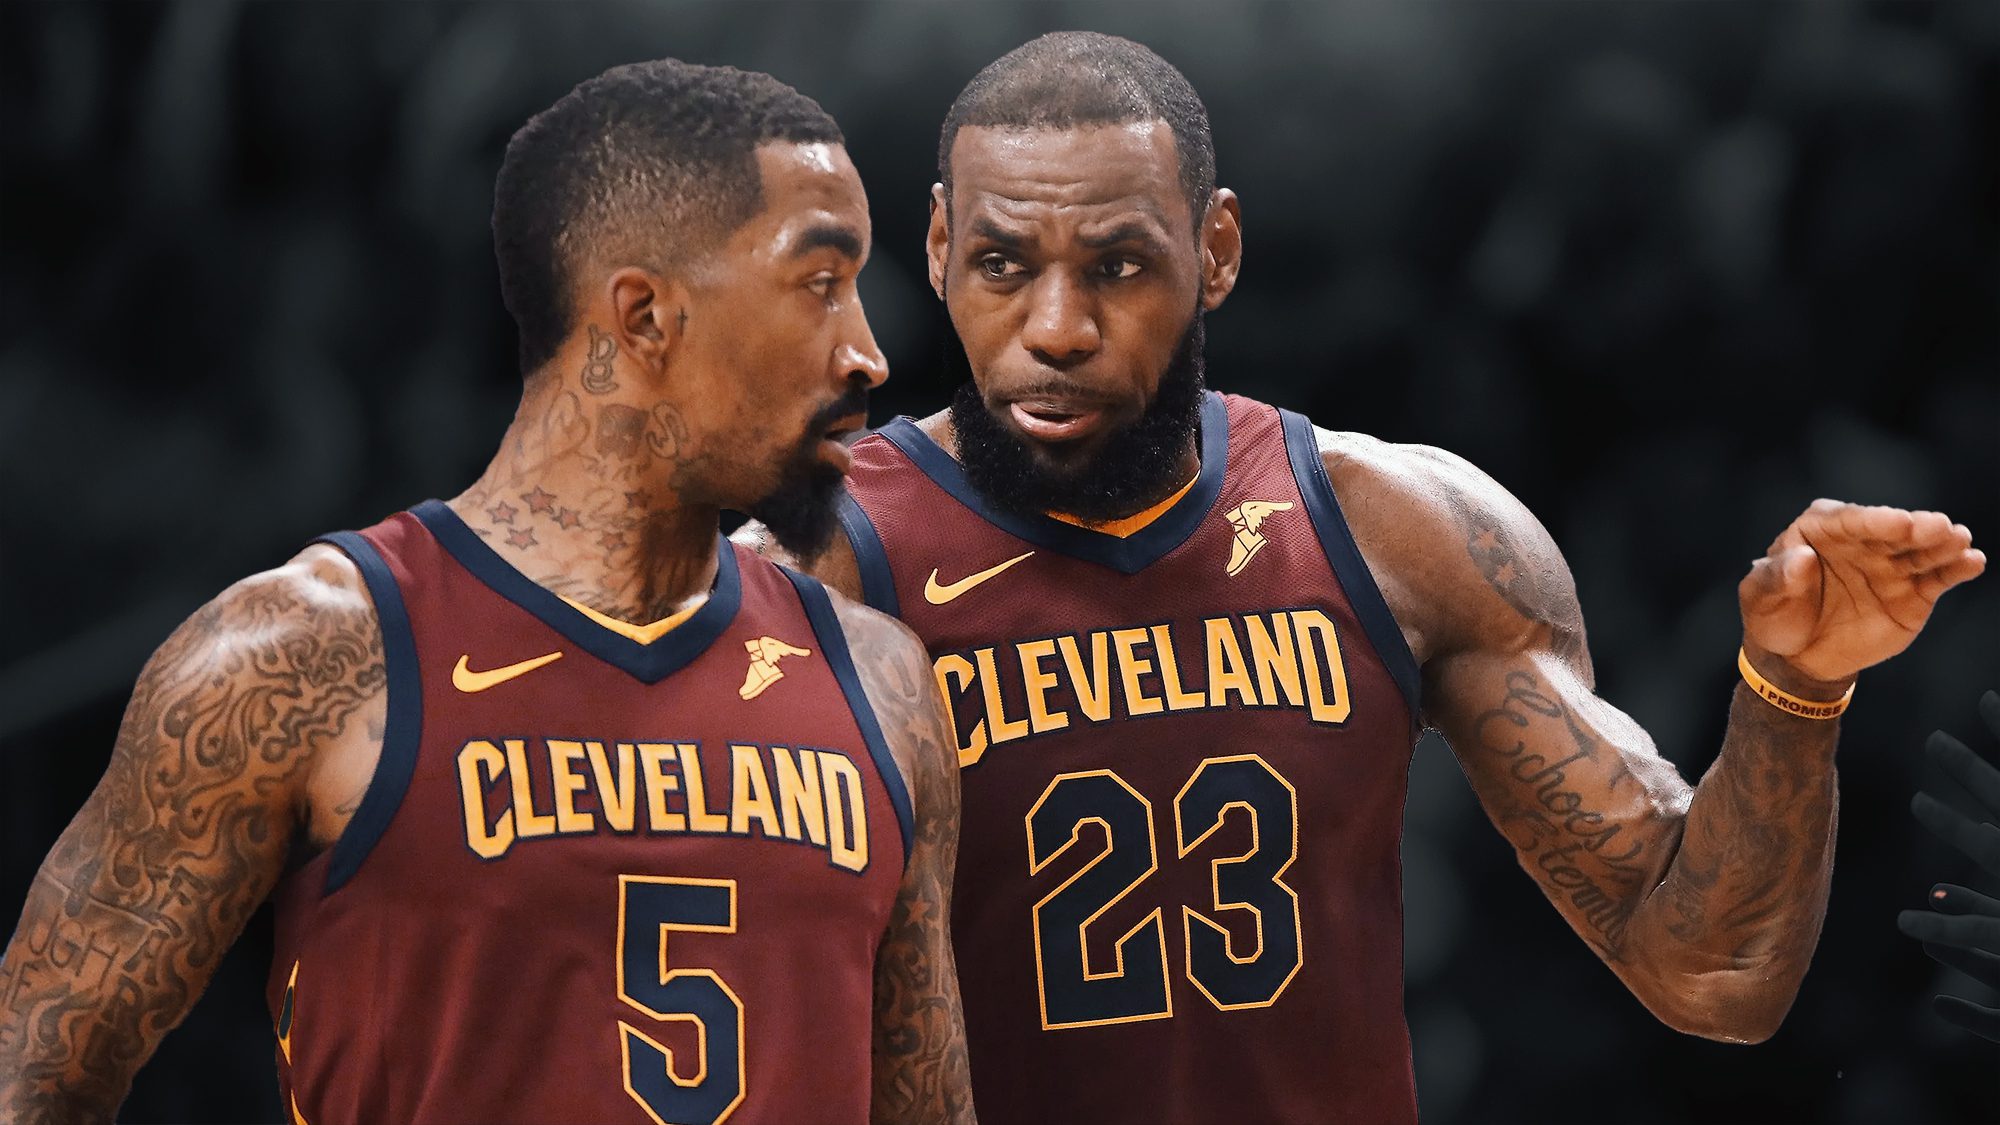 ‘A Lot Of Guys Don’t Like It’: J.R. Smith On What It’s Like Playing With LeBron